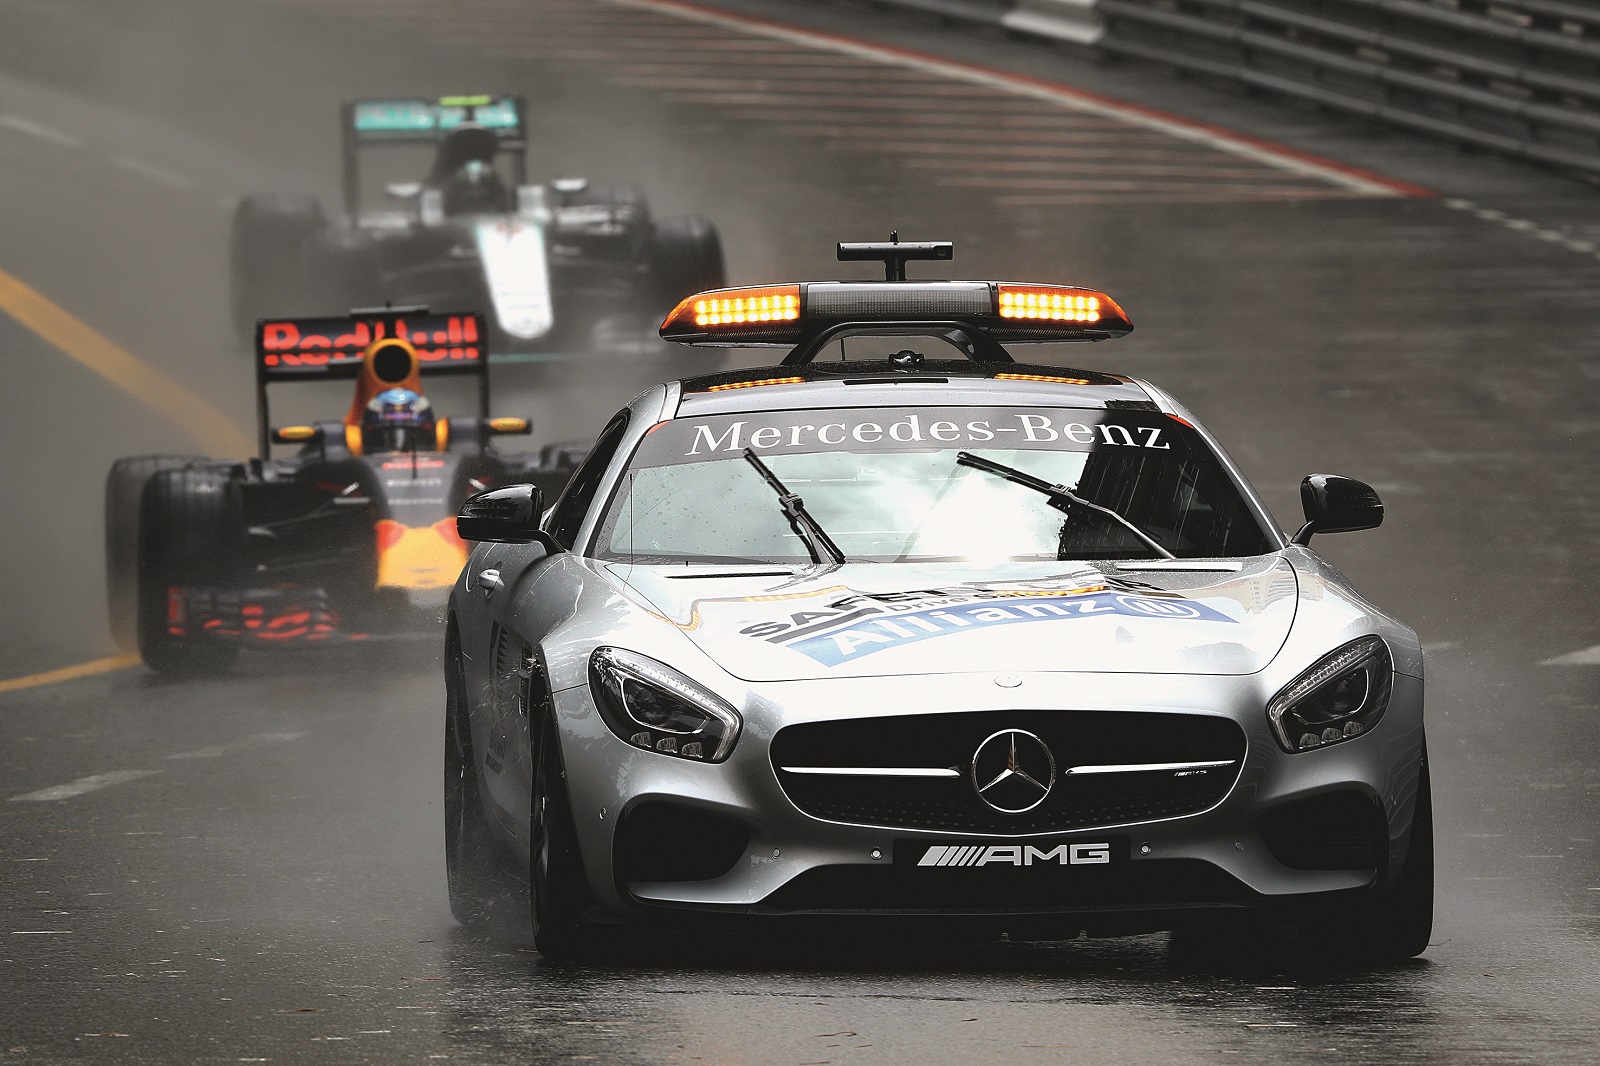 MONTE-CARLO, MONACO - MAY 29: The safety car leads Daniel Ricciardo of Australia driving the (3) Red Bull Racing Red Bull-TAG Heuer RB12 TAG Heuer and Nico Rosberg of Germany driving the (6) Mercedes AMG Petronas F1 Team Mercedes F1 WO7 Mercedes PU106C Hybrid turbo at the start during the Monaco Formula One Grand Prix at Circuit de Monaco on May 29, 2016 in Monte-Carlo, Monaco.  (Photo by Mark Thompson/Getty Images)